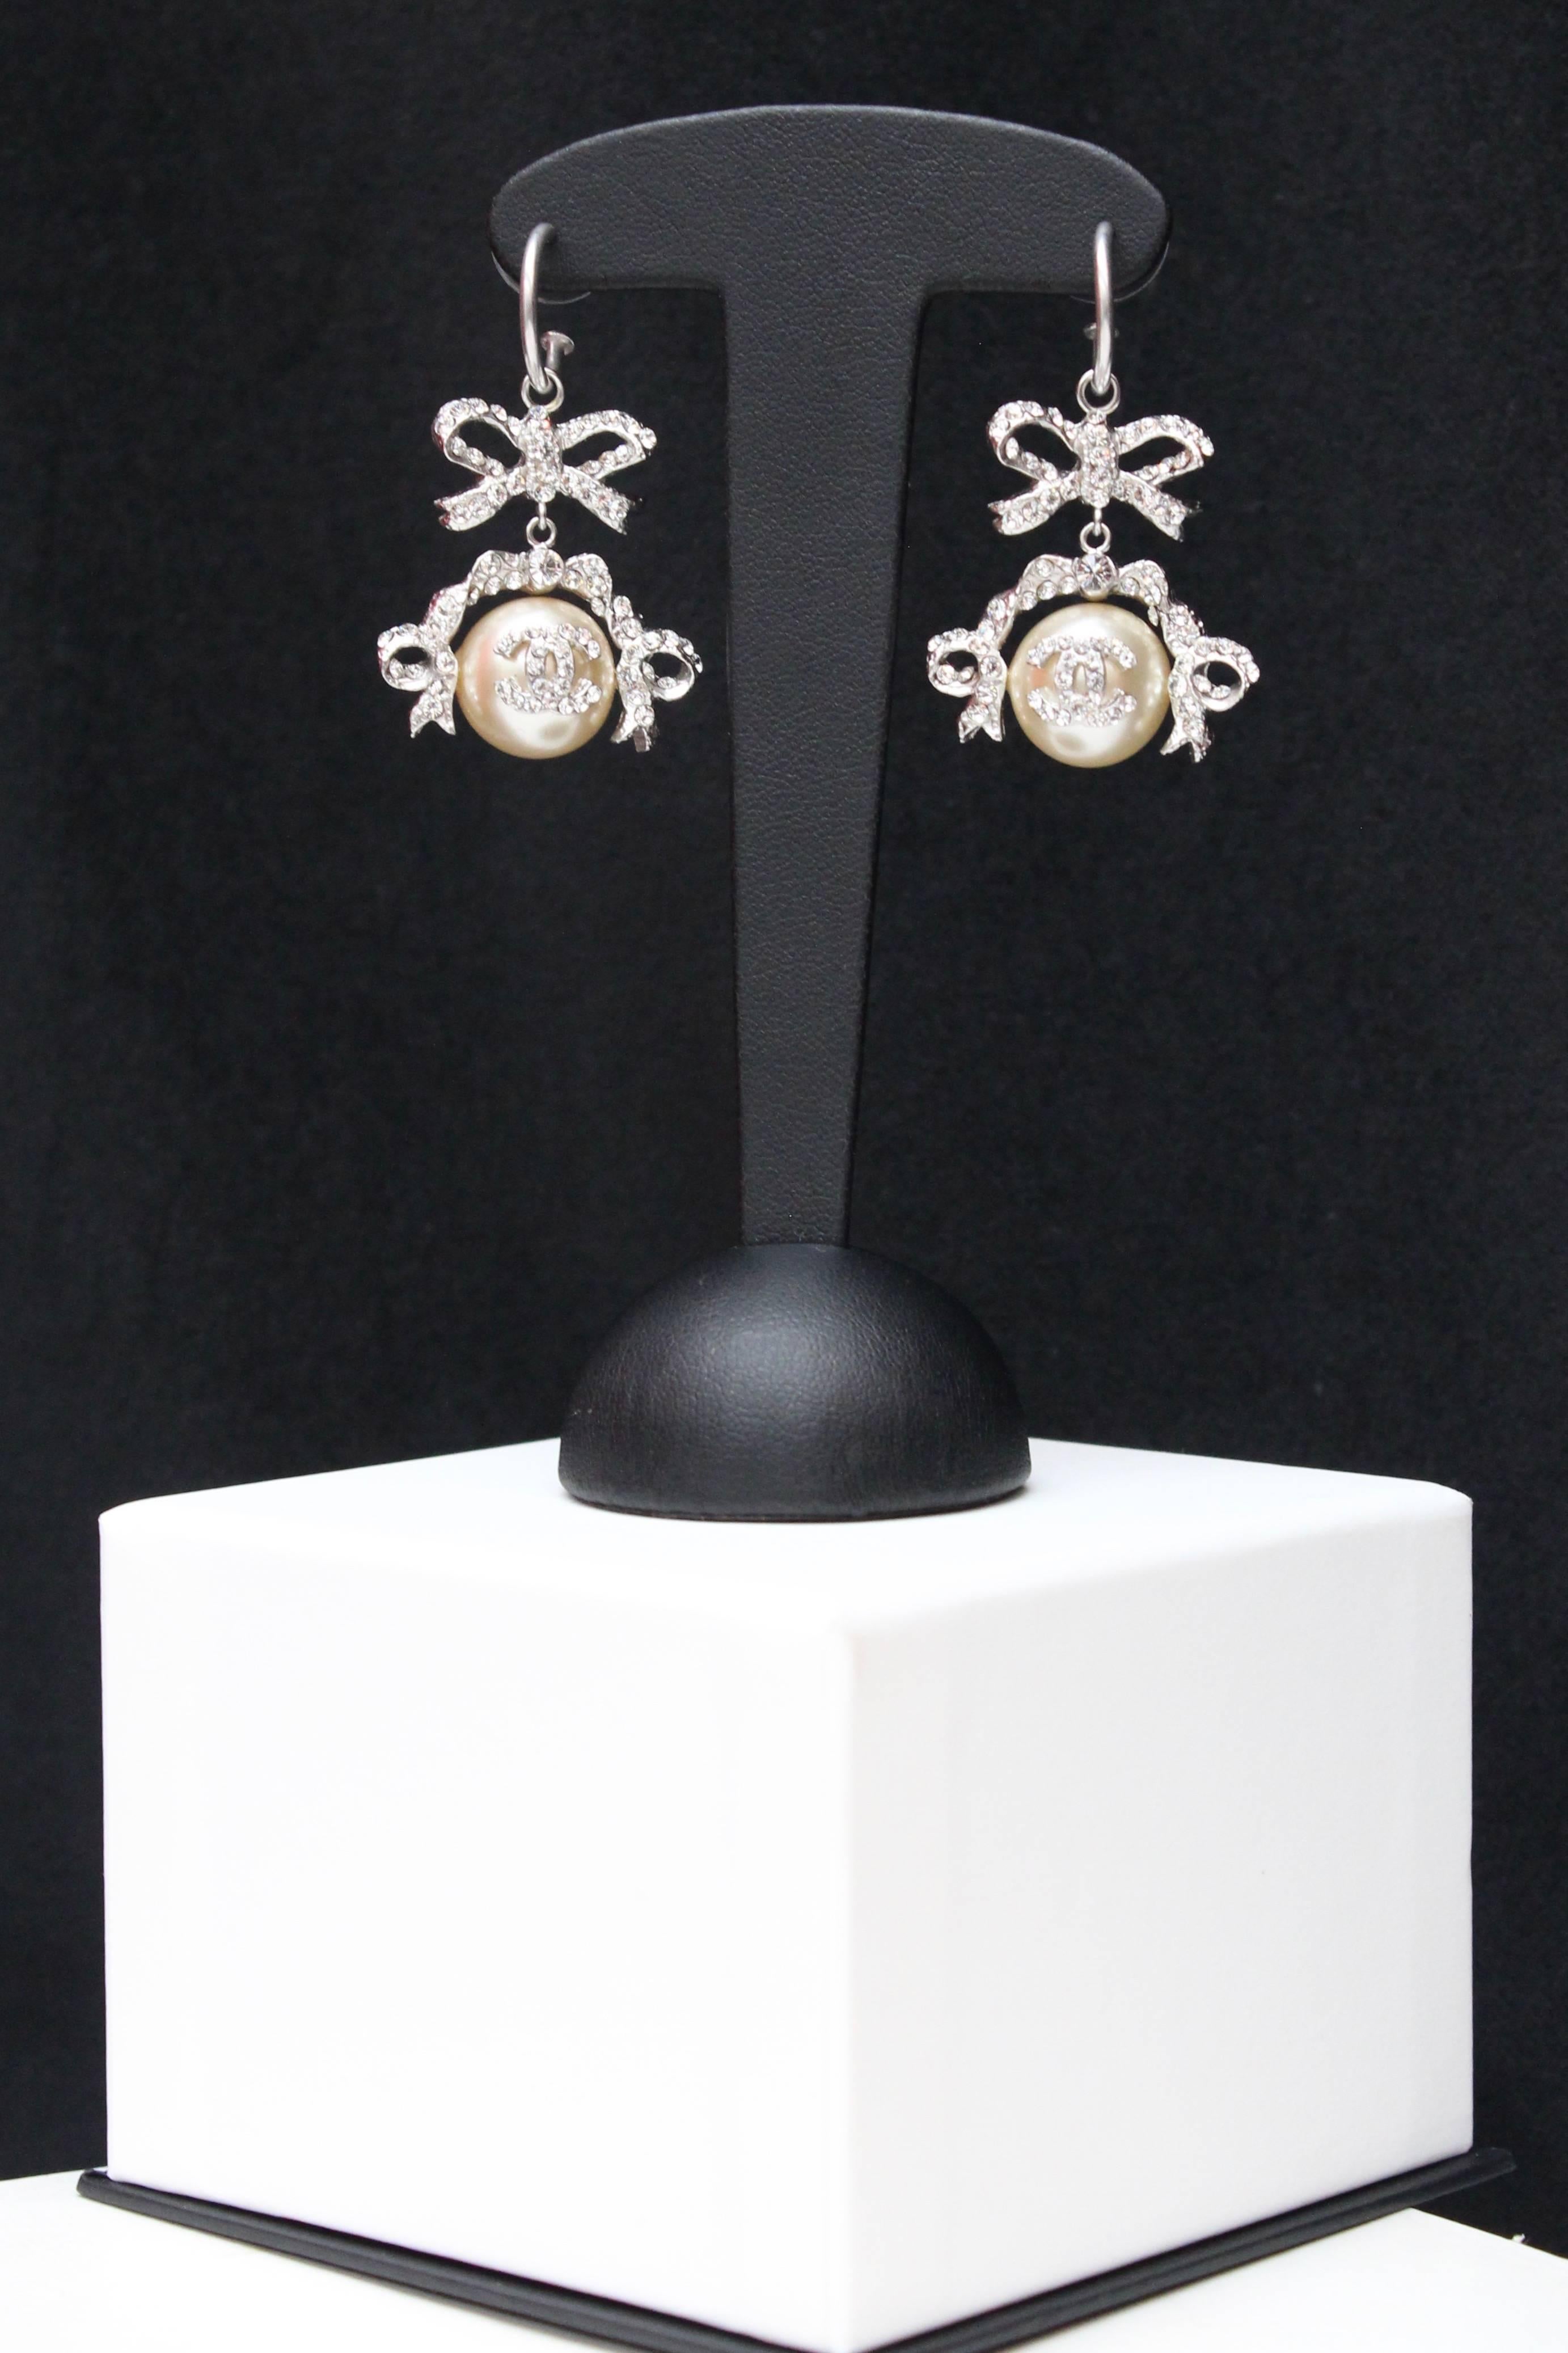 CHANEL (Made in France) Splendid pair of earrings representing a silver plated bow and ribbons set with white rhinestones, and a faux-pearl embellished with the CC logo paved with rhinestones. Signed at the back of the bow.

2004 Spring-Summer